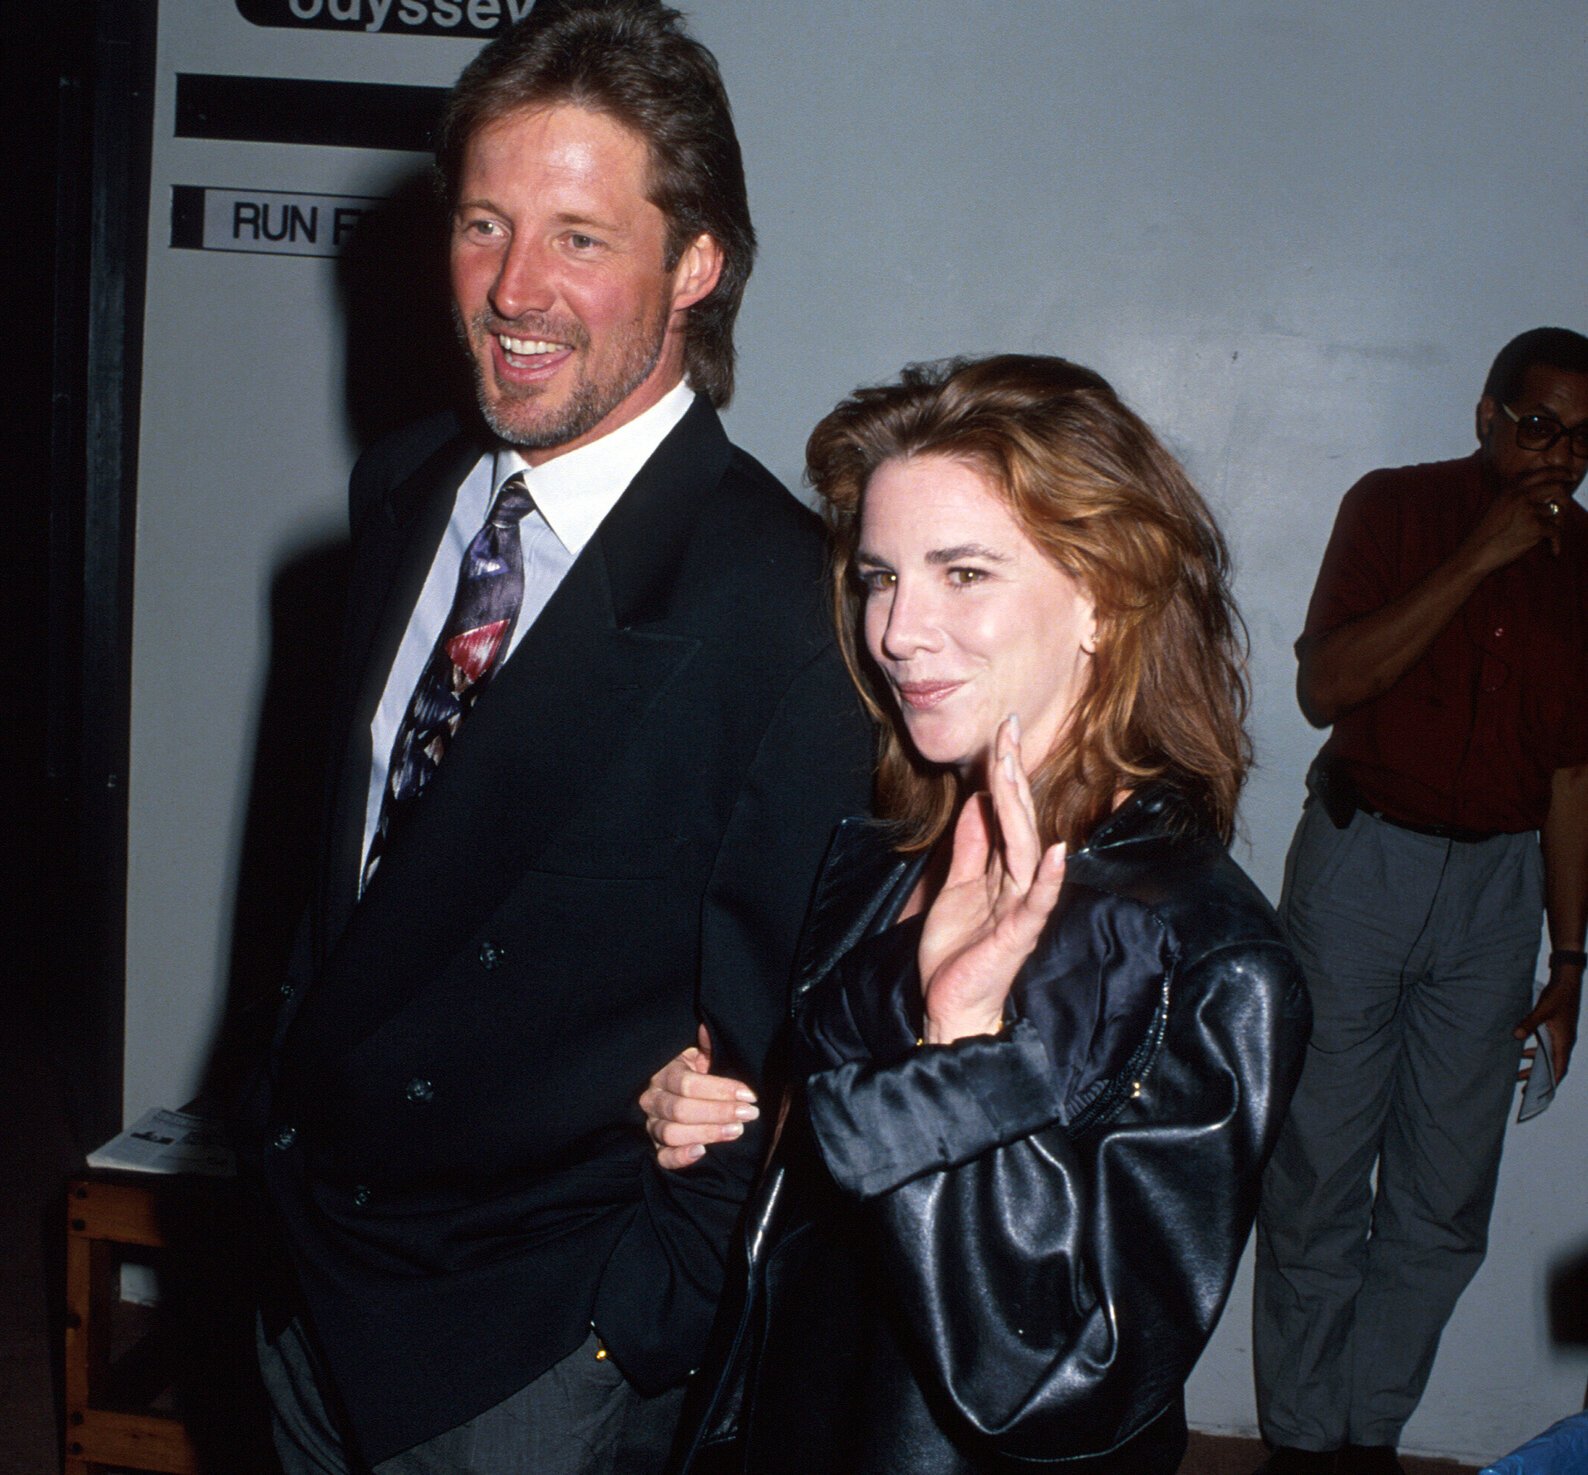 Bruce Boxleitner and Melissa Gilbert — Gilbert is holding Boxleitner's arm, smiling and waving.